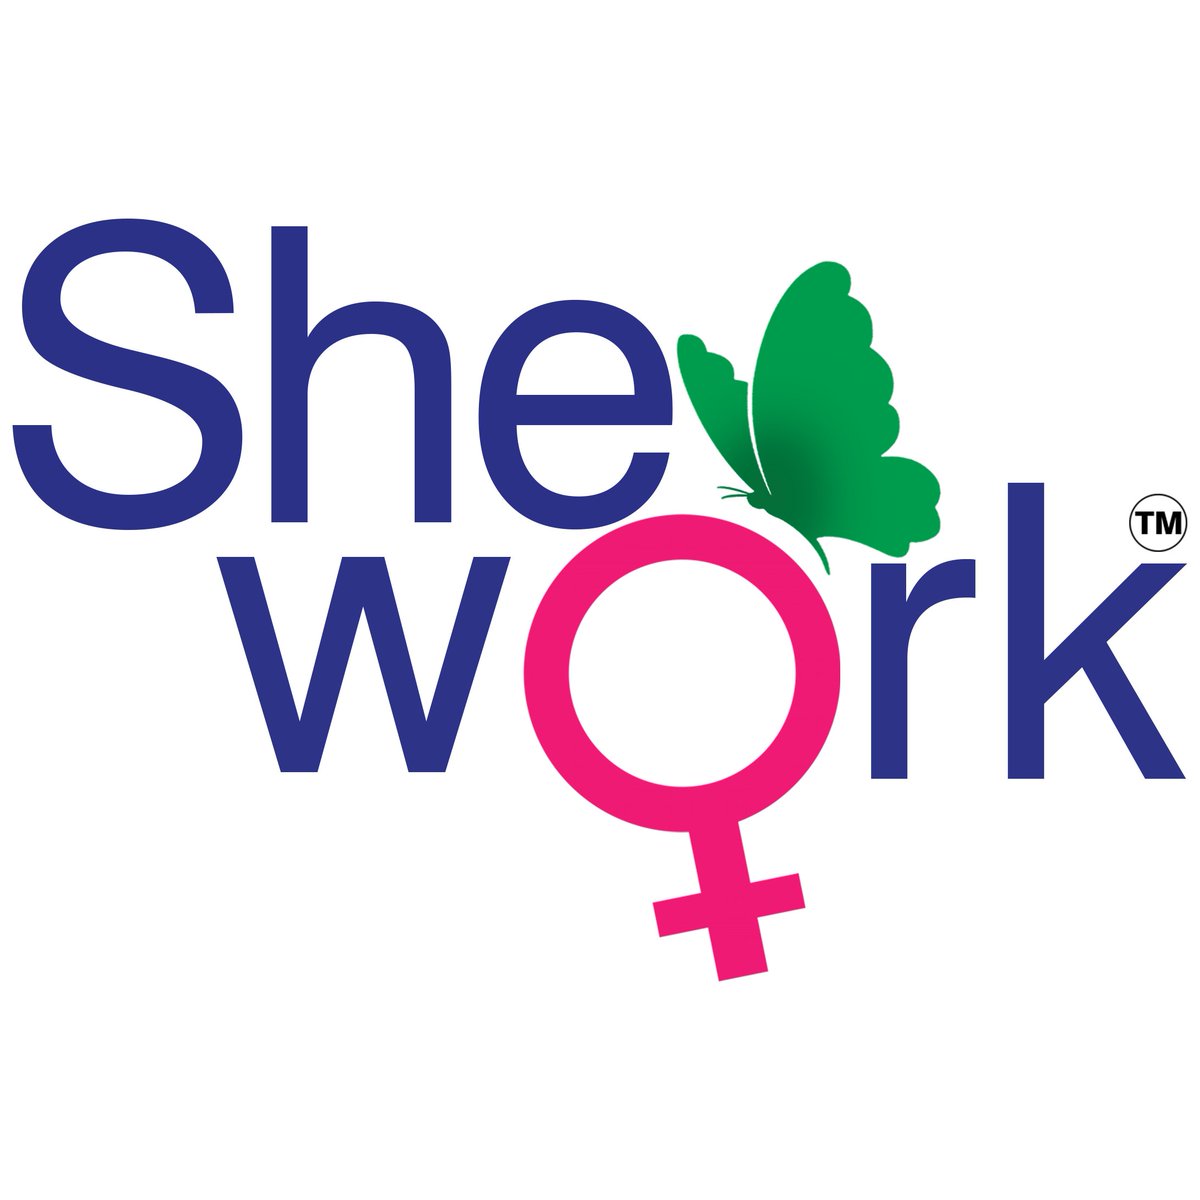 .@SheWorkIn, a Pune Based #Startup Launches a Campaign Focusing on Overall Well-Being of Women

businesswireindia.com/sheworkin-a-pu…